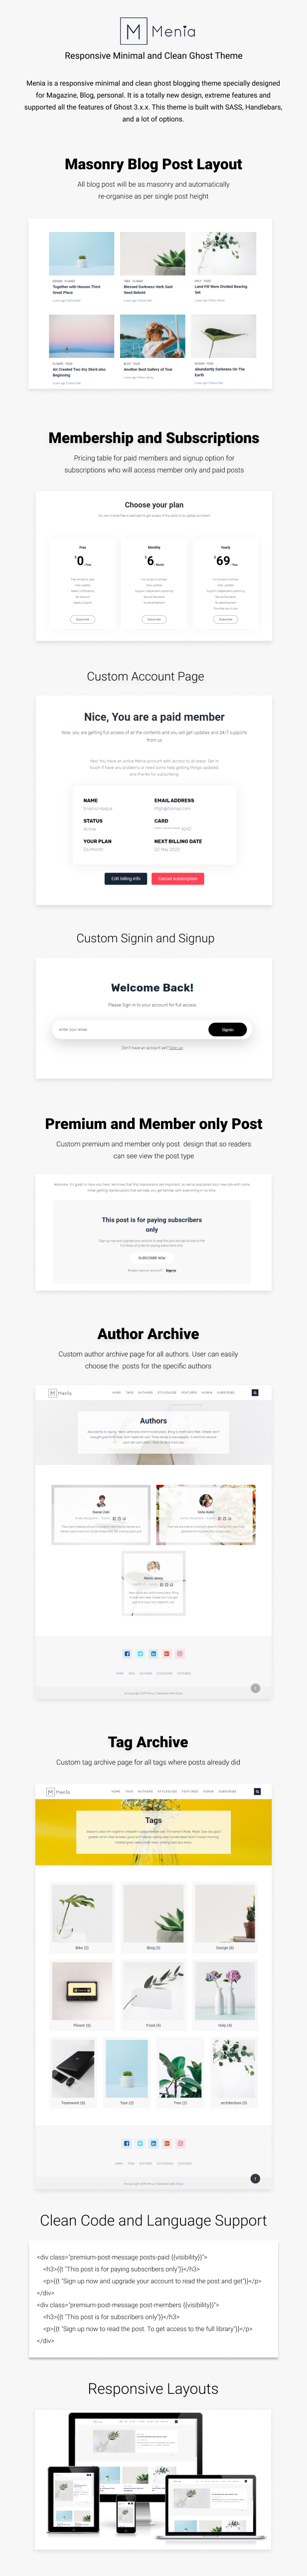 Menia is a responsive minimal and clean ghost blogging theme